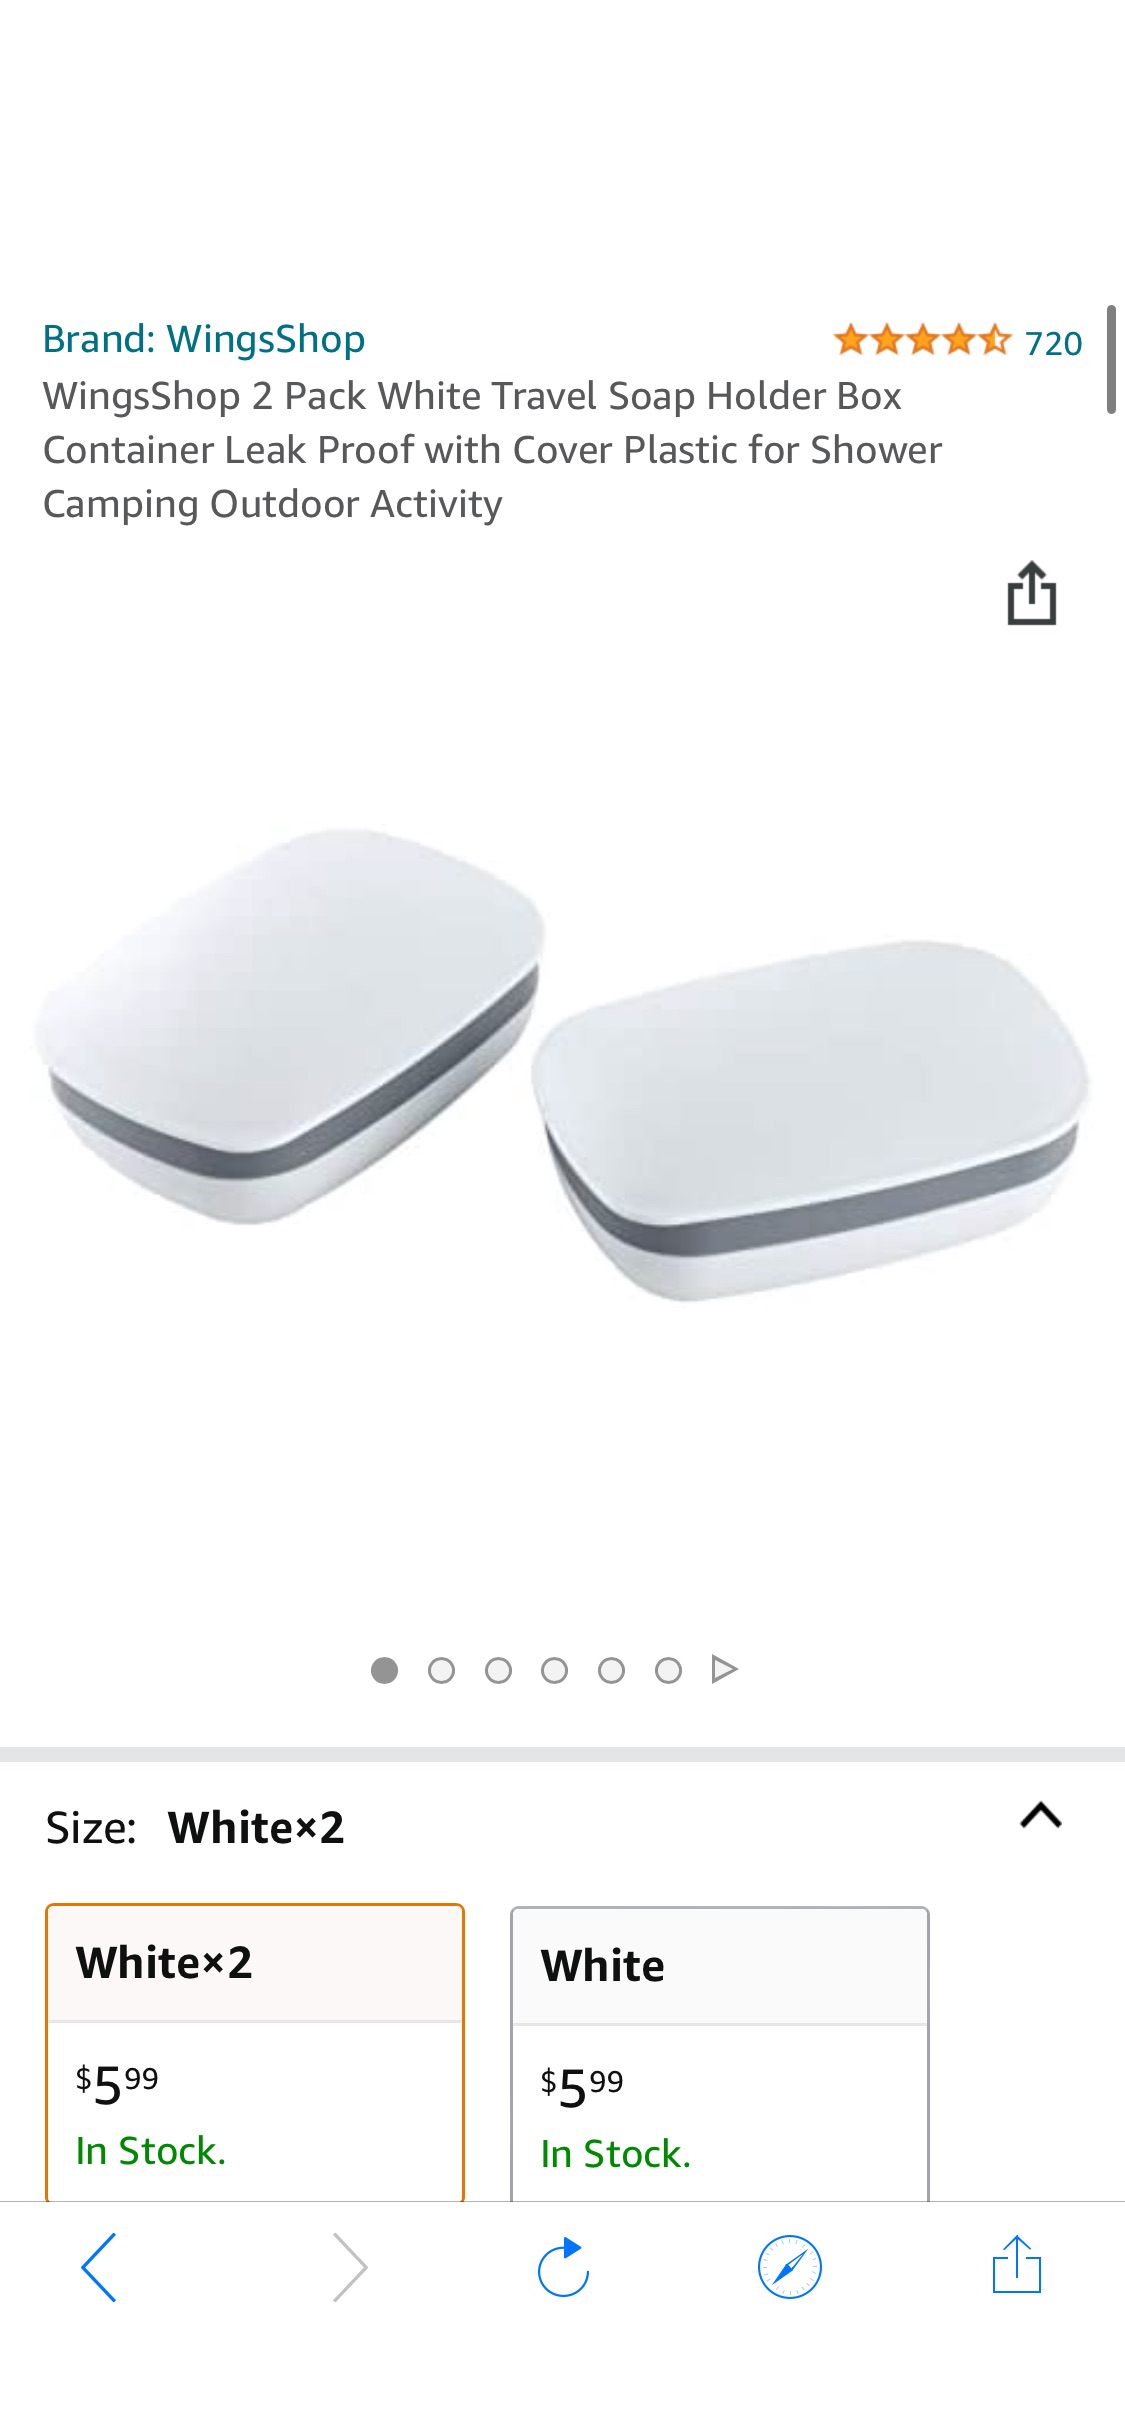 Amazon.com: WingsShop 2 Pack White Travel Soap Holder Box Container Leak Proof with Cover Plastic for Shower Camping Outdoor Activity :皂盒